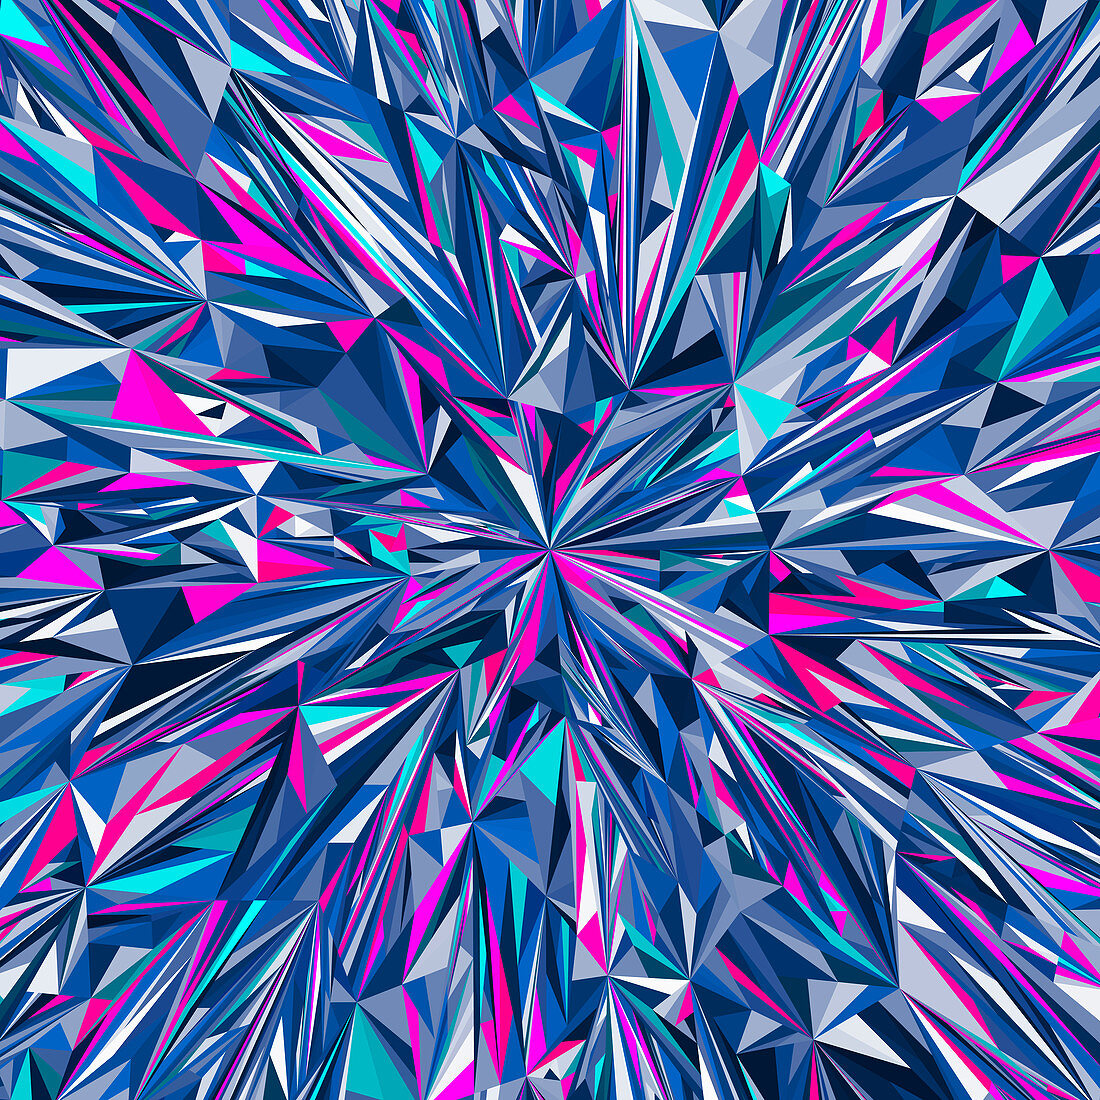 Vibrant angular blue and pink abstract pattern, illustration